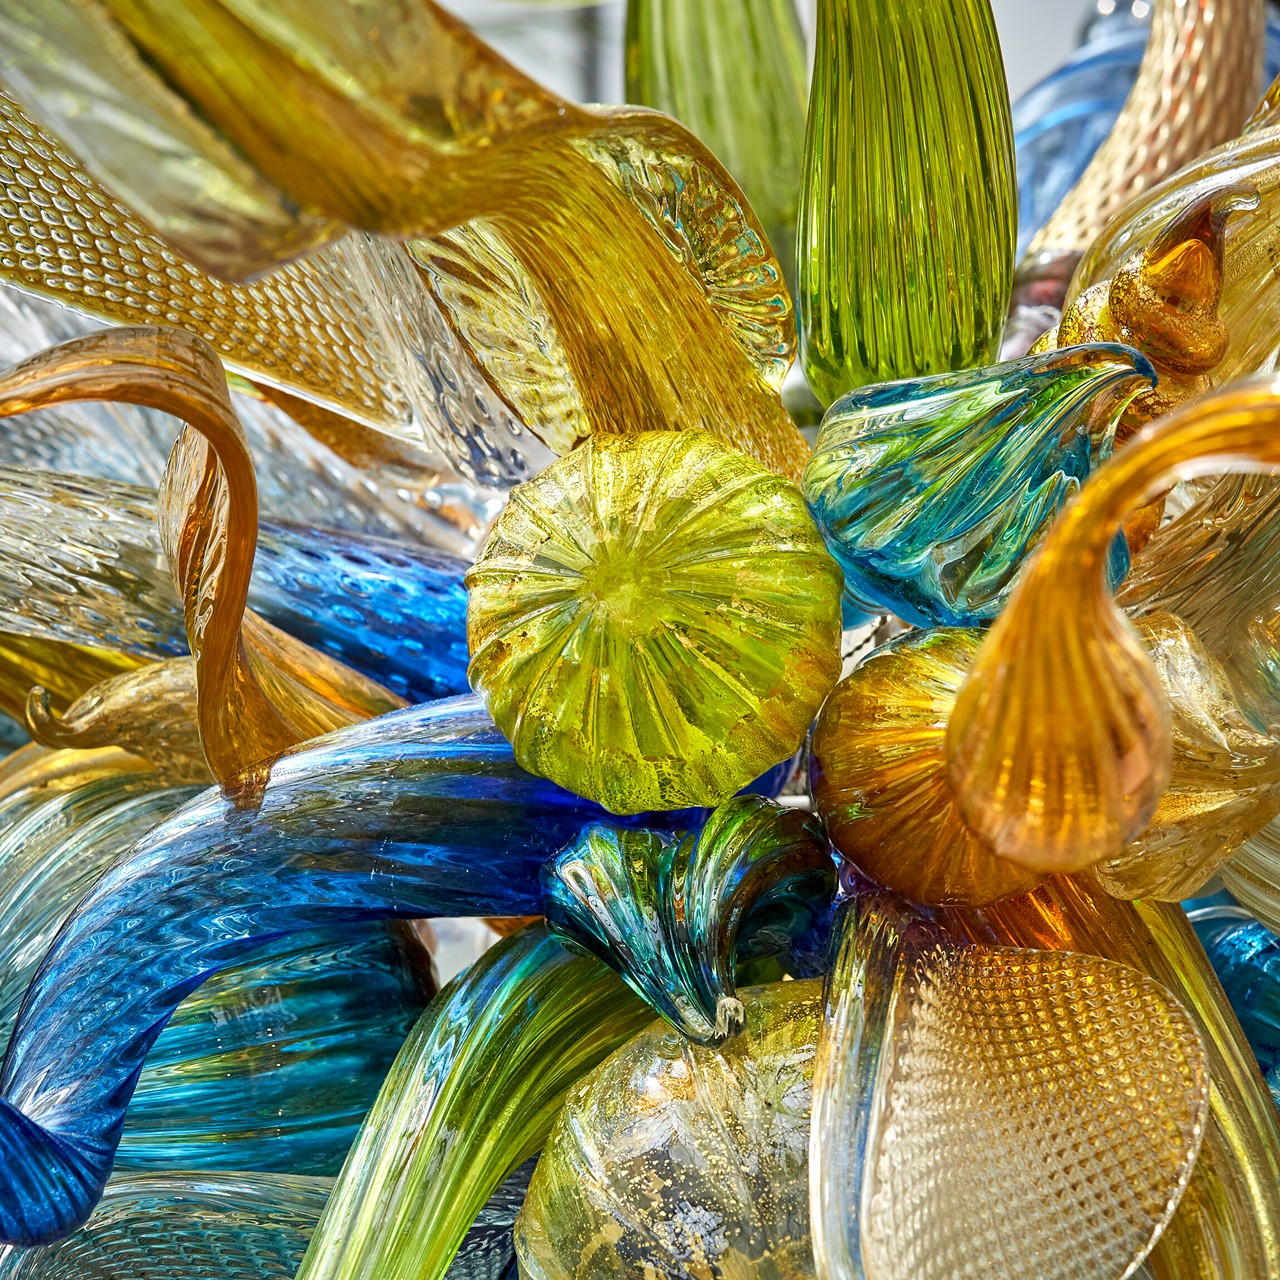 Dale Chihuly
Burnished Amber, Citron, and Teal Chandeliers (detail), 2017
Biltmore, Asheville, North Carolina, installed 2018
© 2022 Chihuly Studio. All rights reserved.